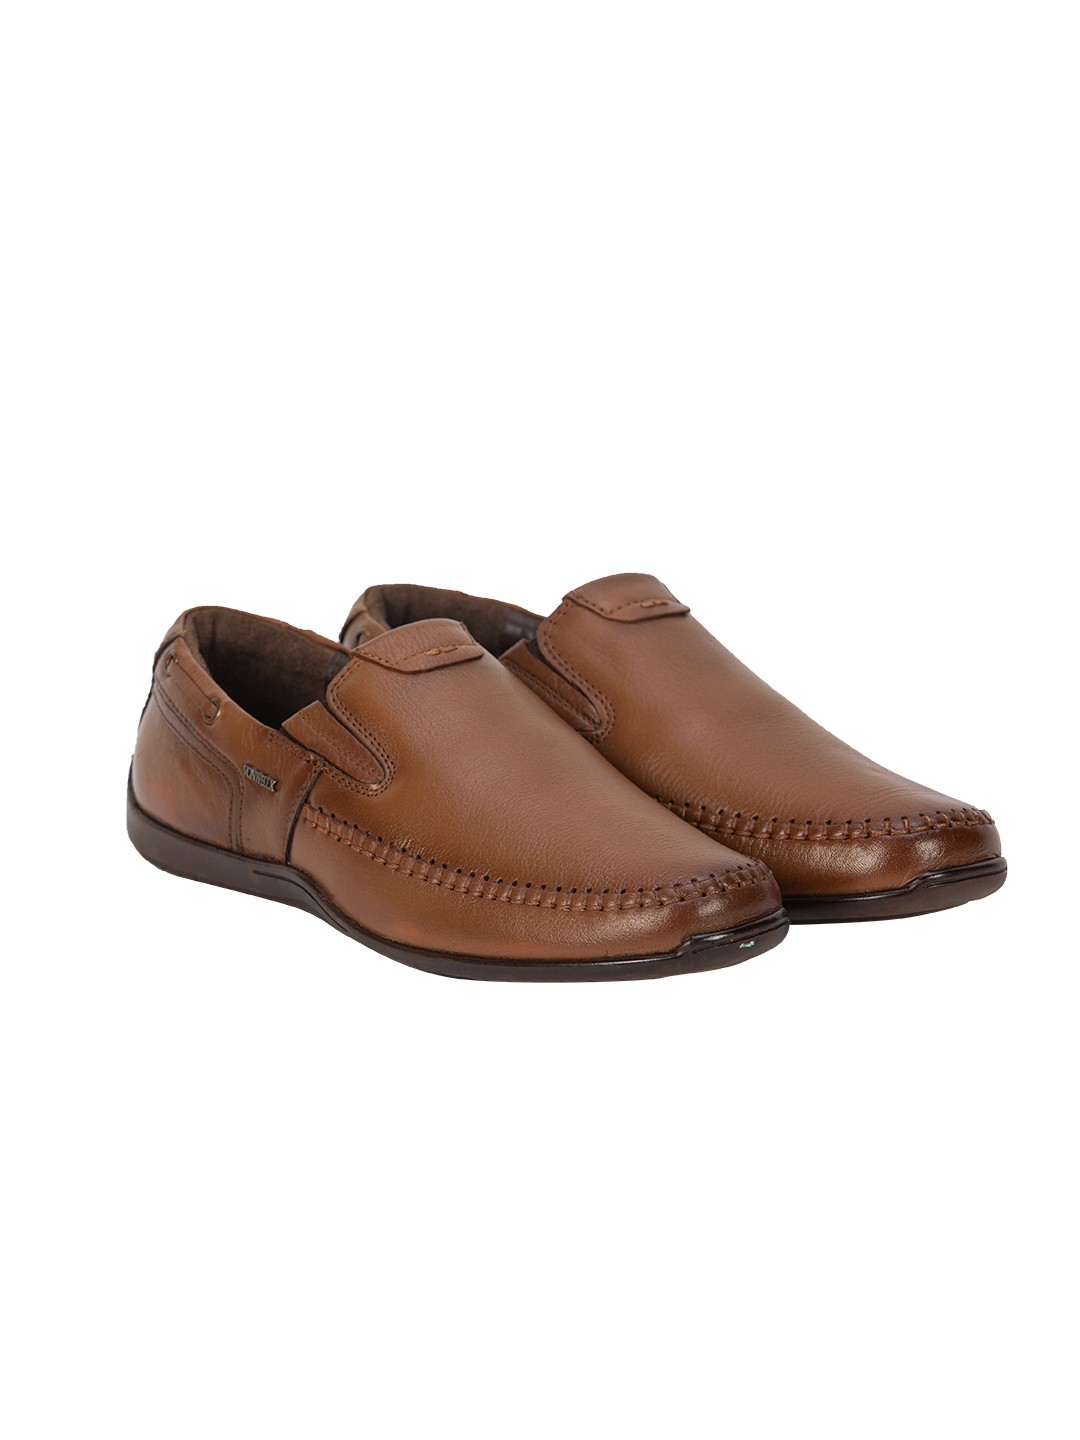 Buy Von Wellx Axel Casual Tan Shoes Online in Kandy